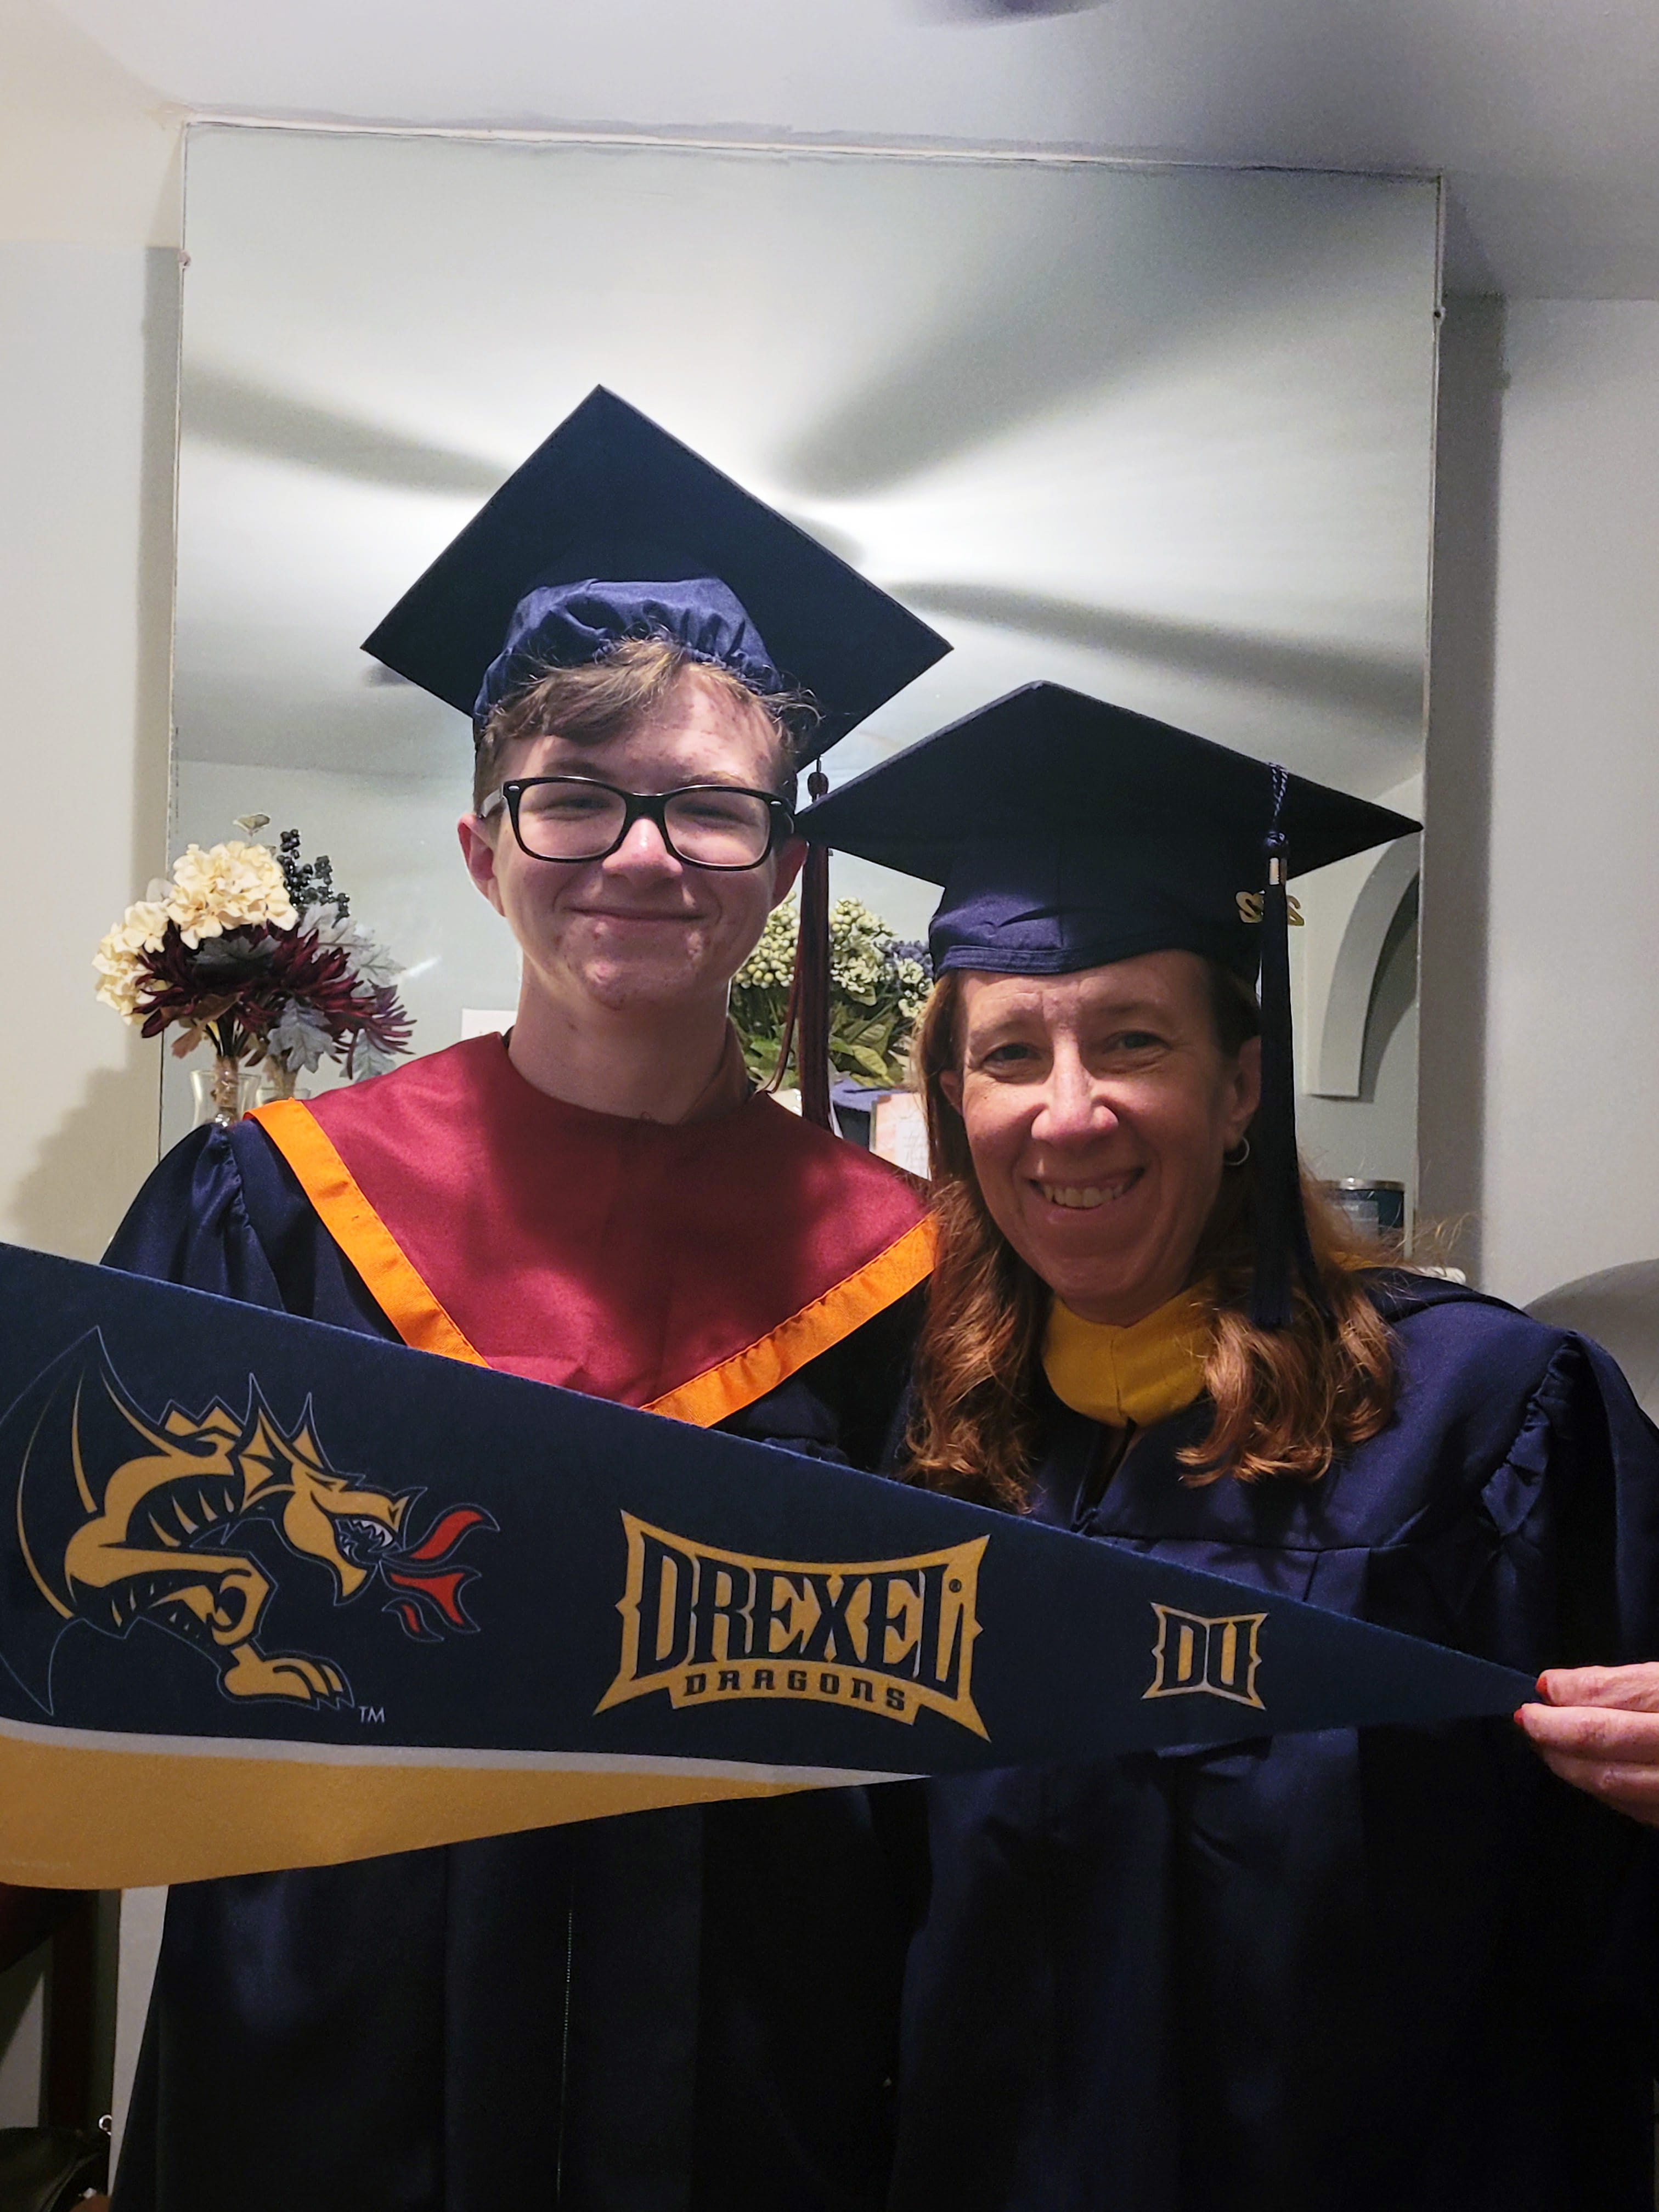 A mother and son in Drexel commencement regalia holding a Drexel pennant.